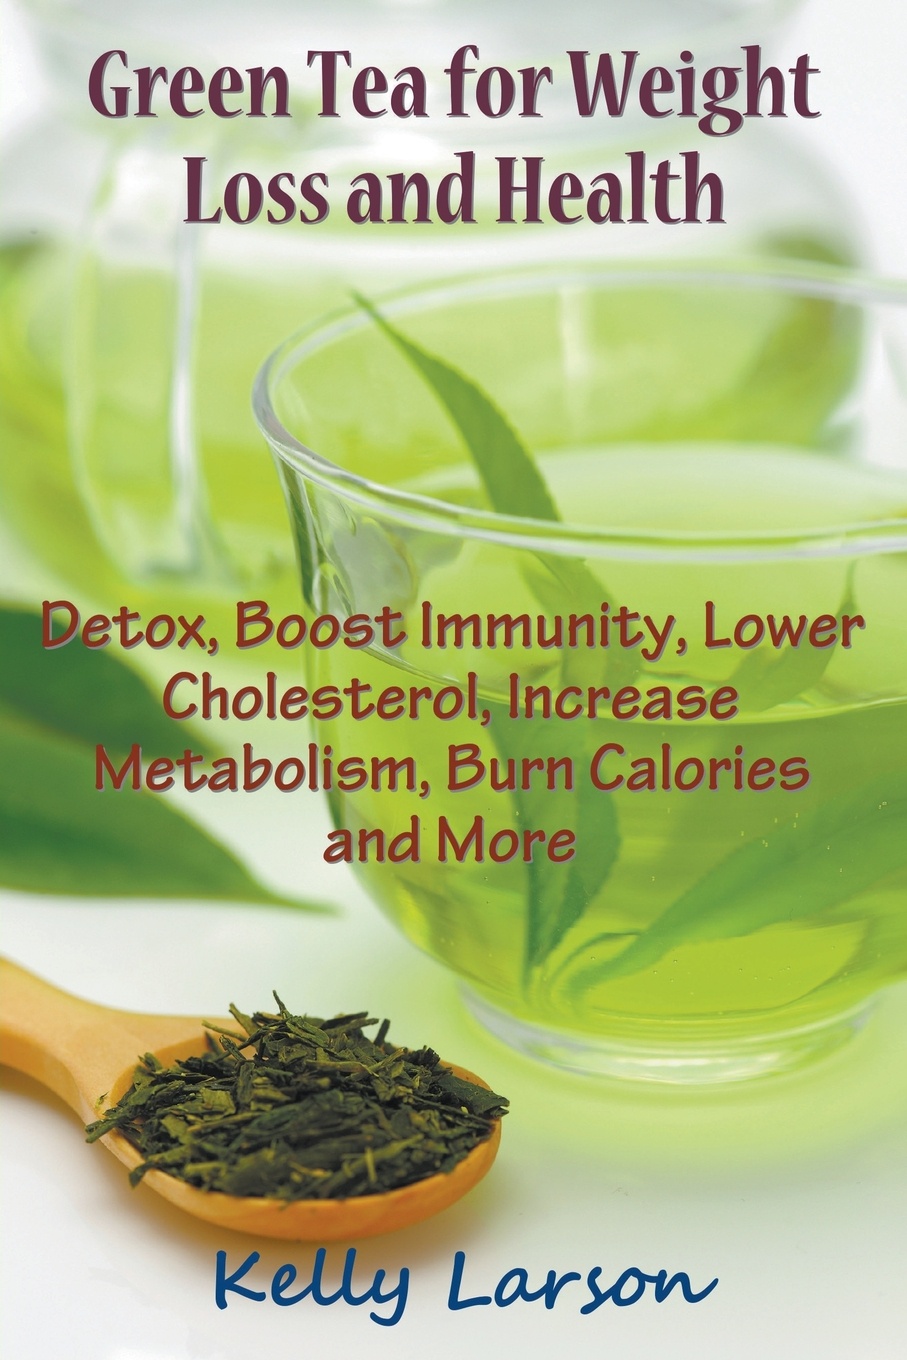 Green Tea for Weight Loss. Detox, Boost Immunity, Lower Cholesterol, Increase Metabolism, Burn Calories and More